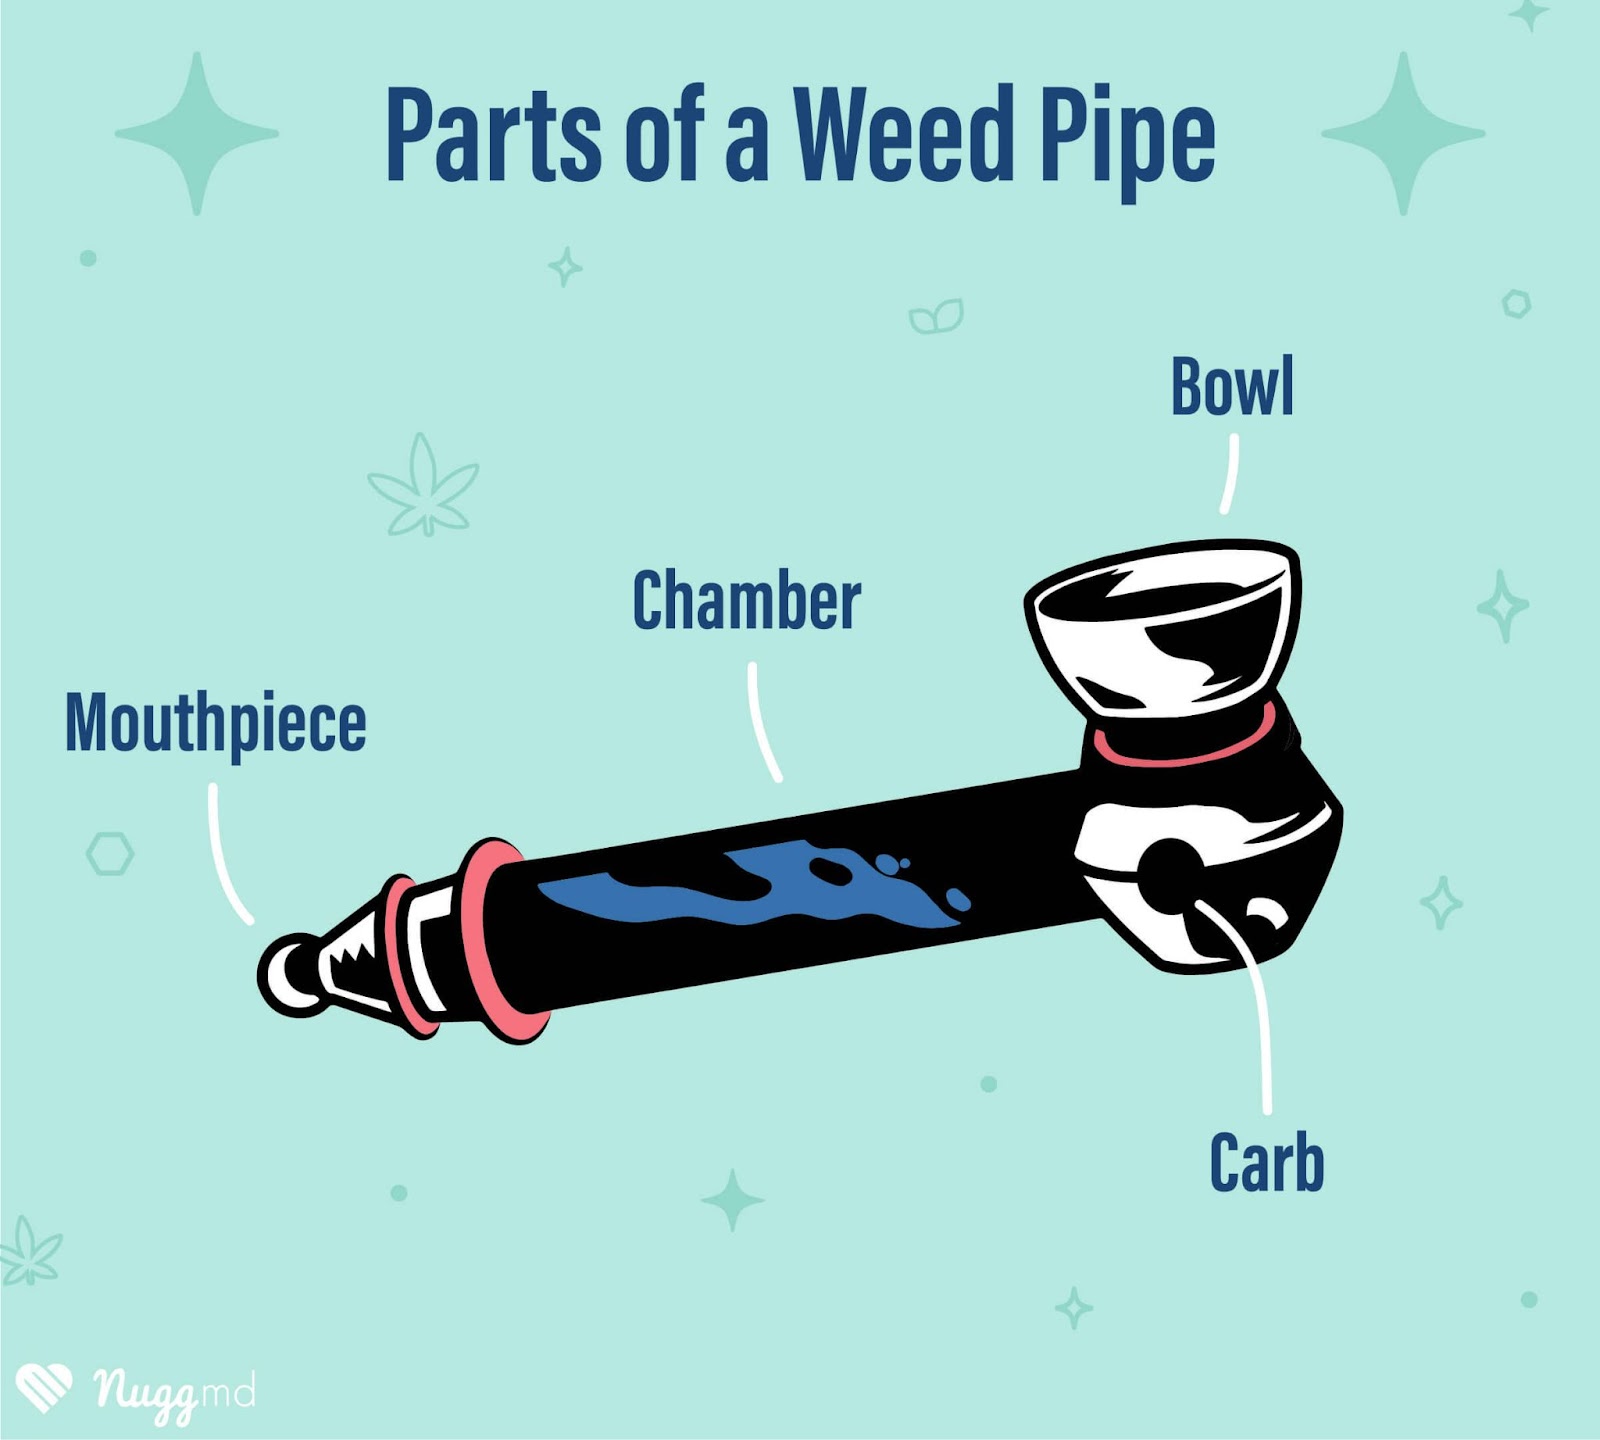 Major parts of a weed pipe